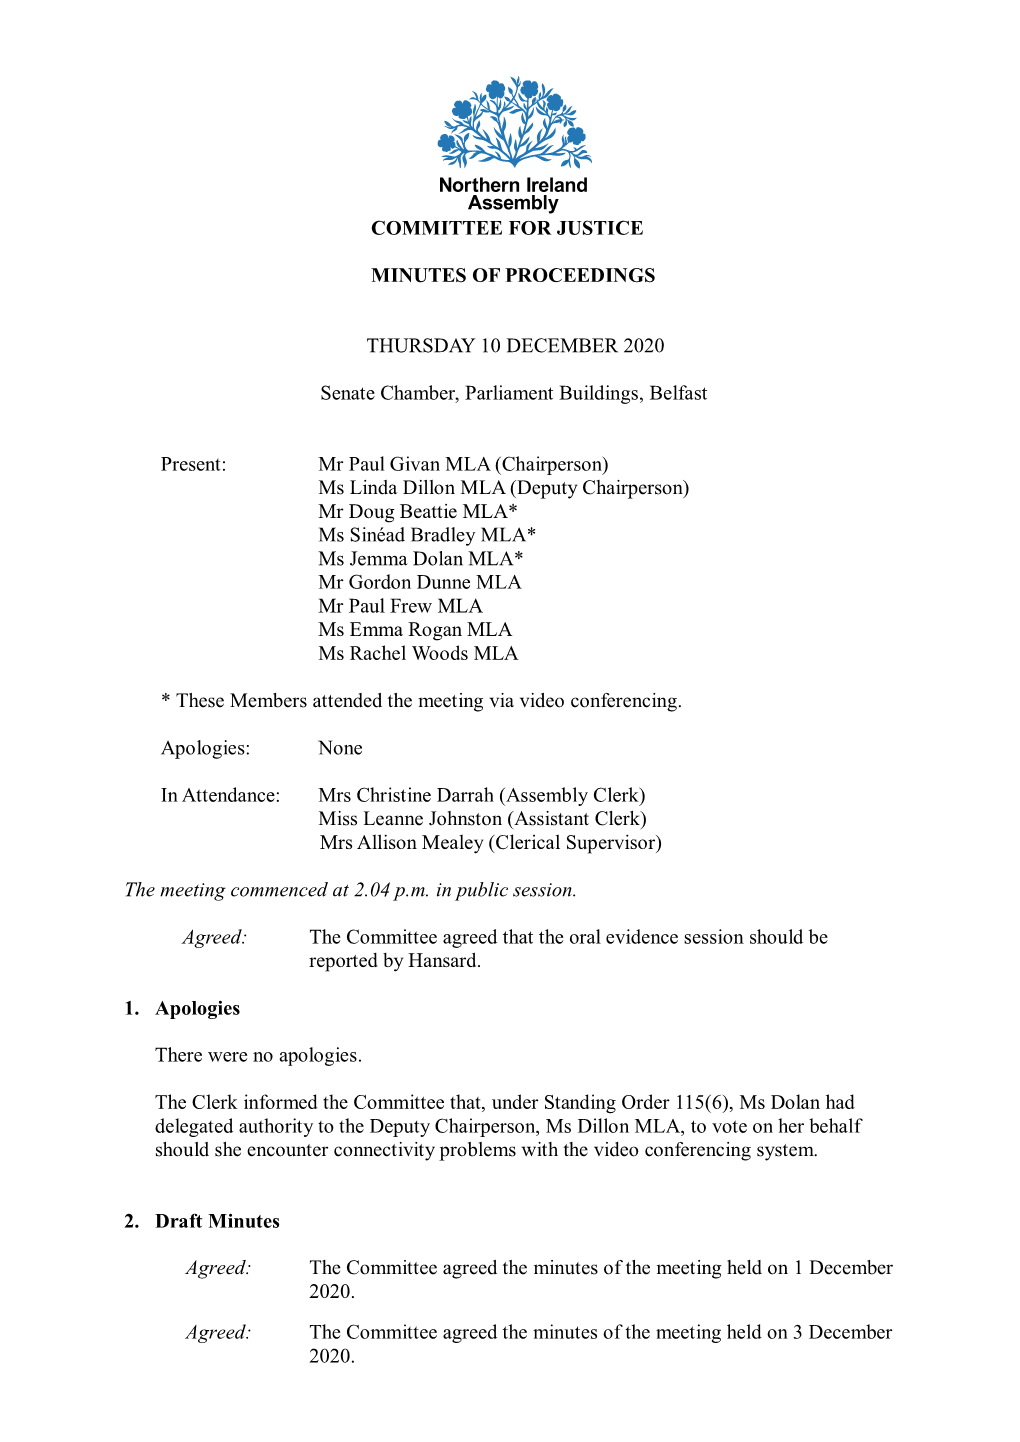 Committee for Justice Meeting Minutes of Proceedings 10